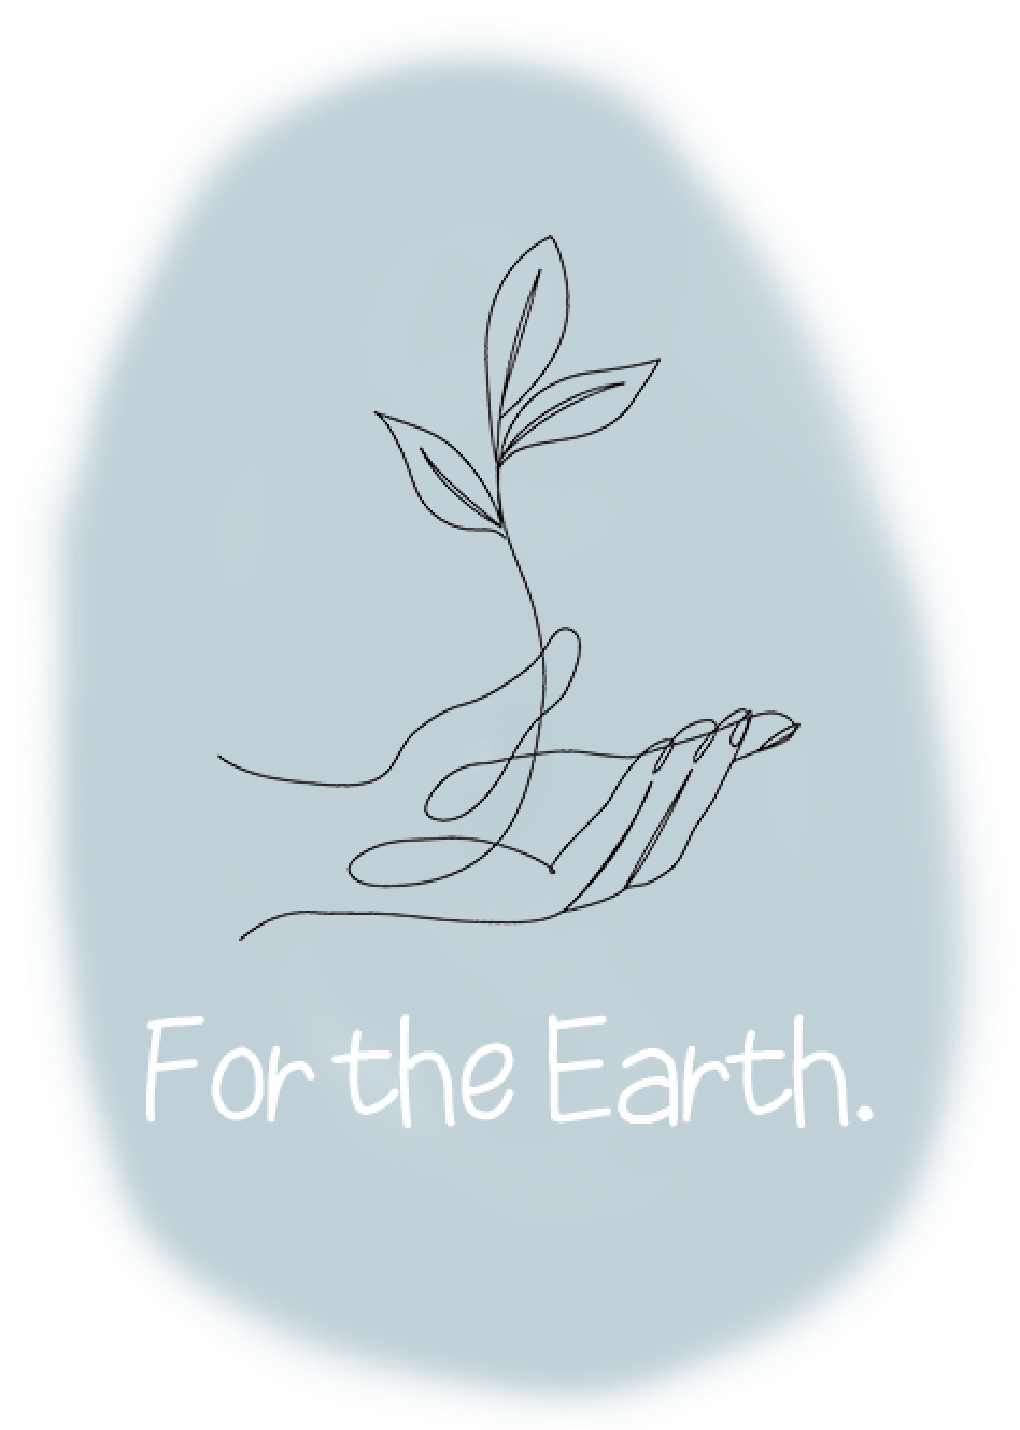 For the earth